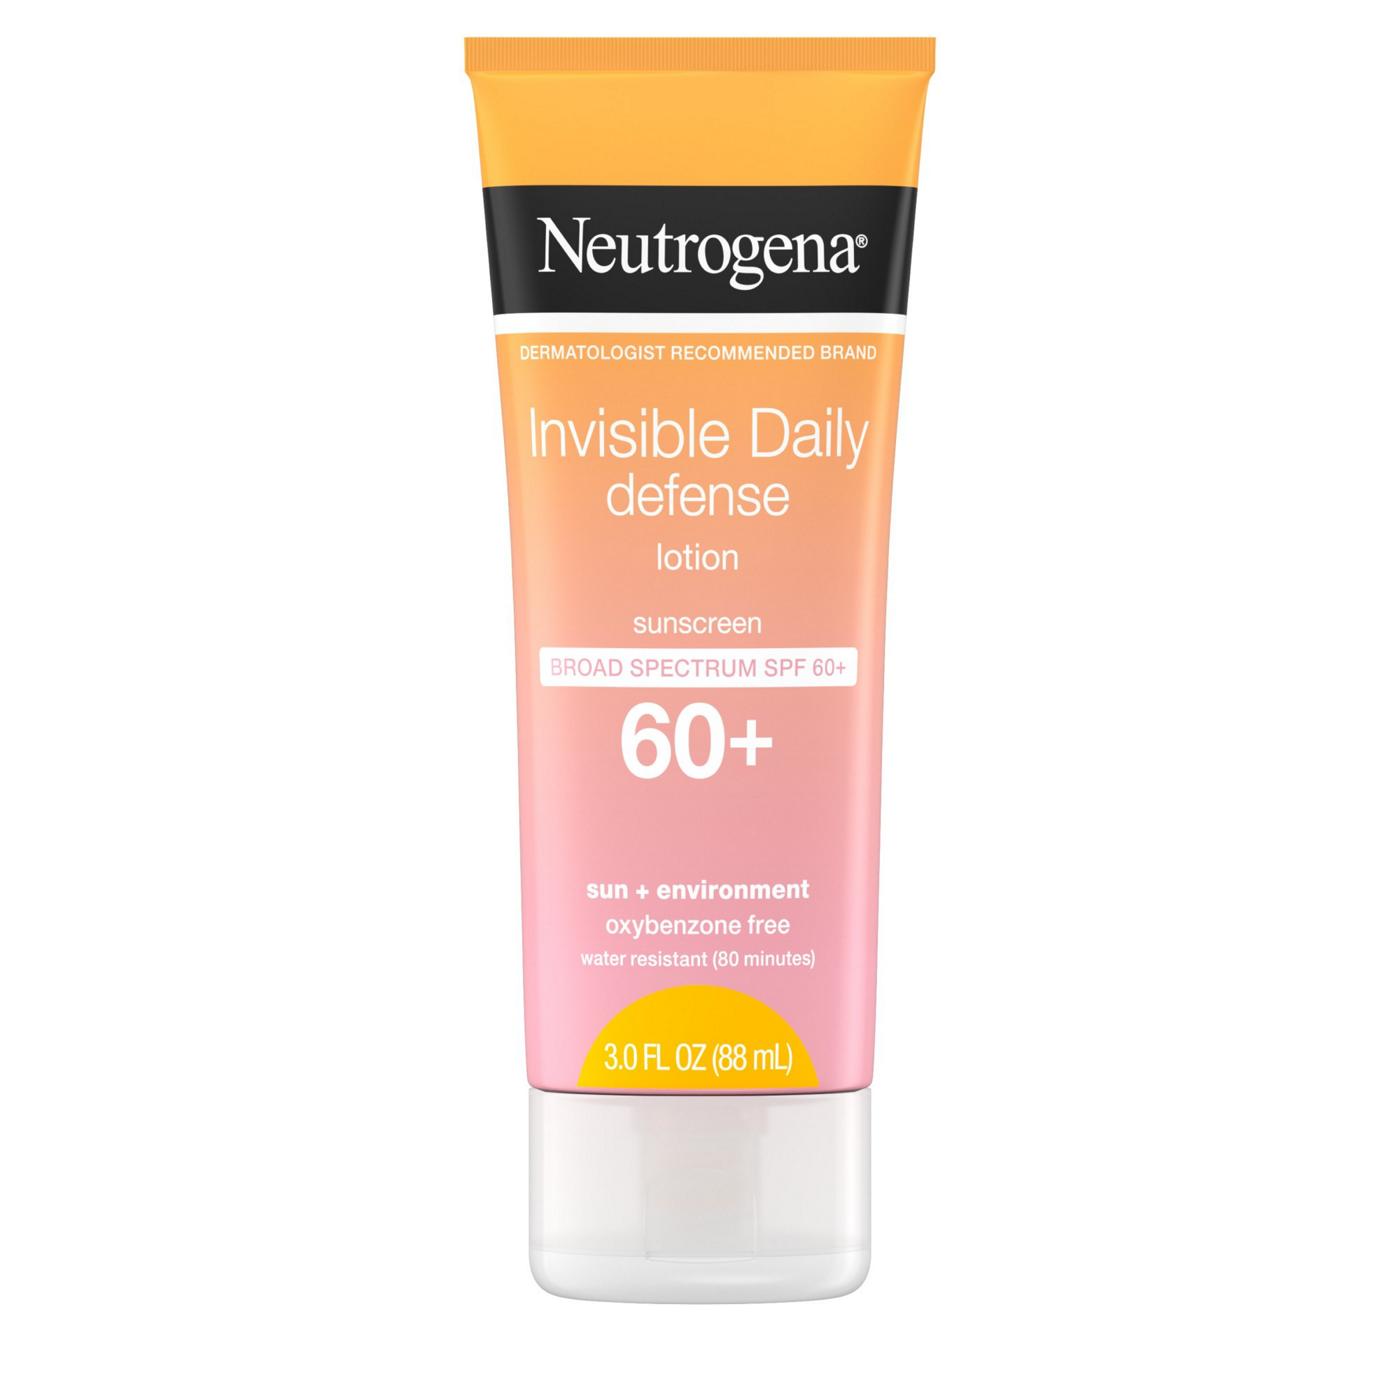 Neutrogena Invisible Daily Defense Sunscreen Lotion - SPF 60+; image 1 of 2